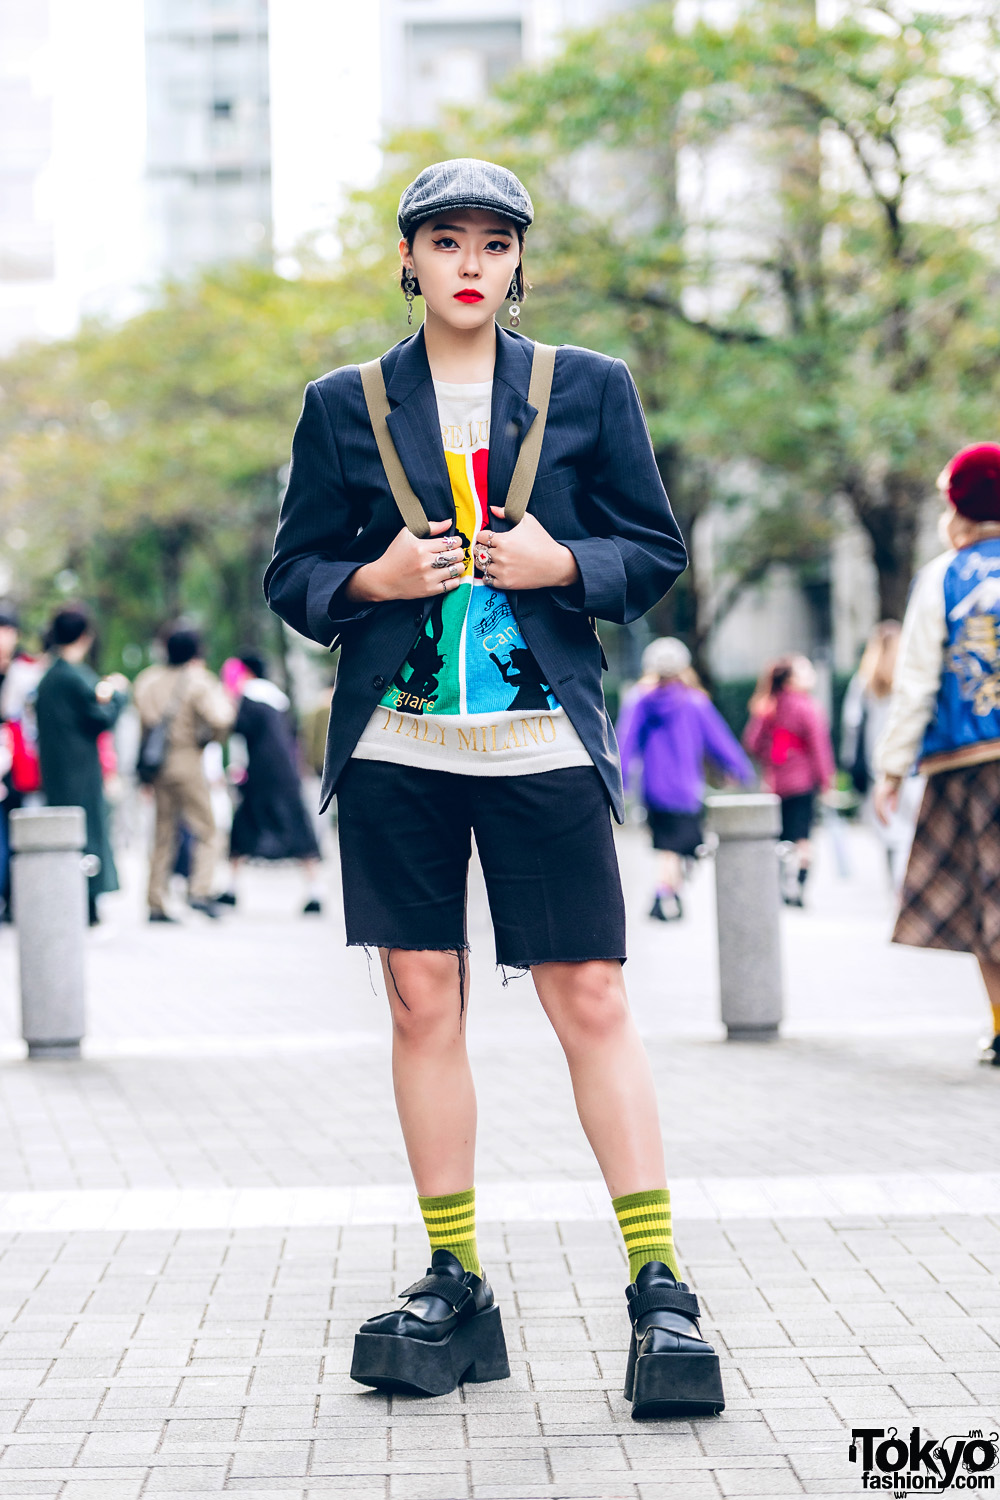 Harajuku Girl in Vintage Streetwear Style w/ Newsboy Cap, Pinstriped Blazer, Dickies Shorts & Mary Quant Backpack